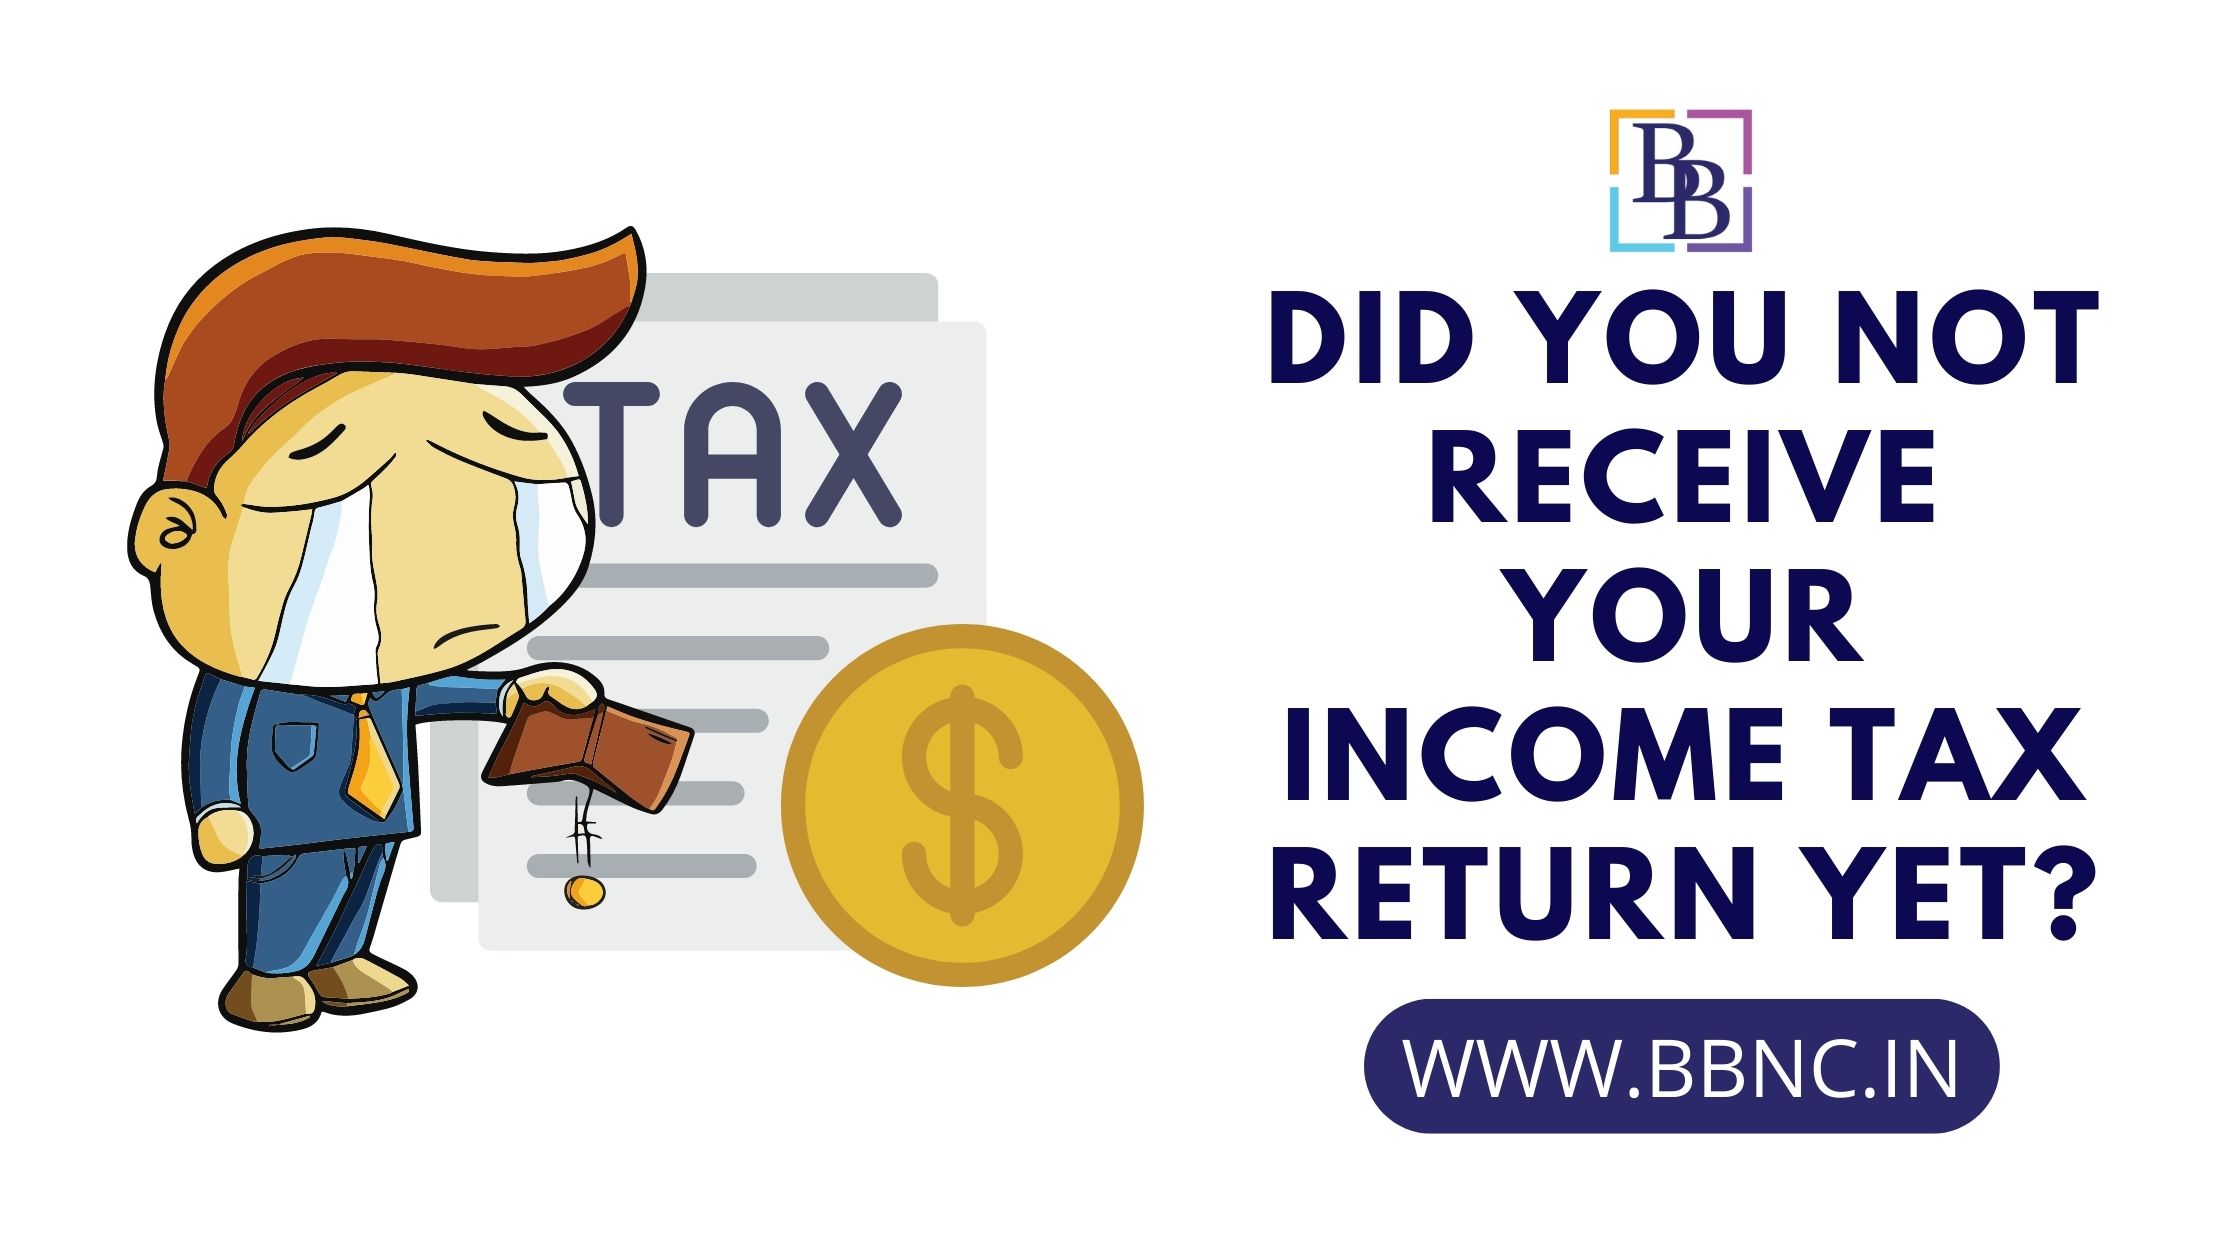 Did you not receive your income tax refund yet, here is how you can check the status of your income tax refund